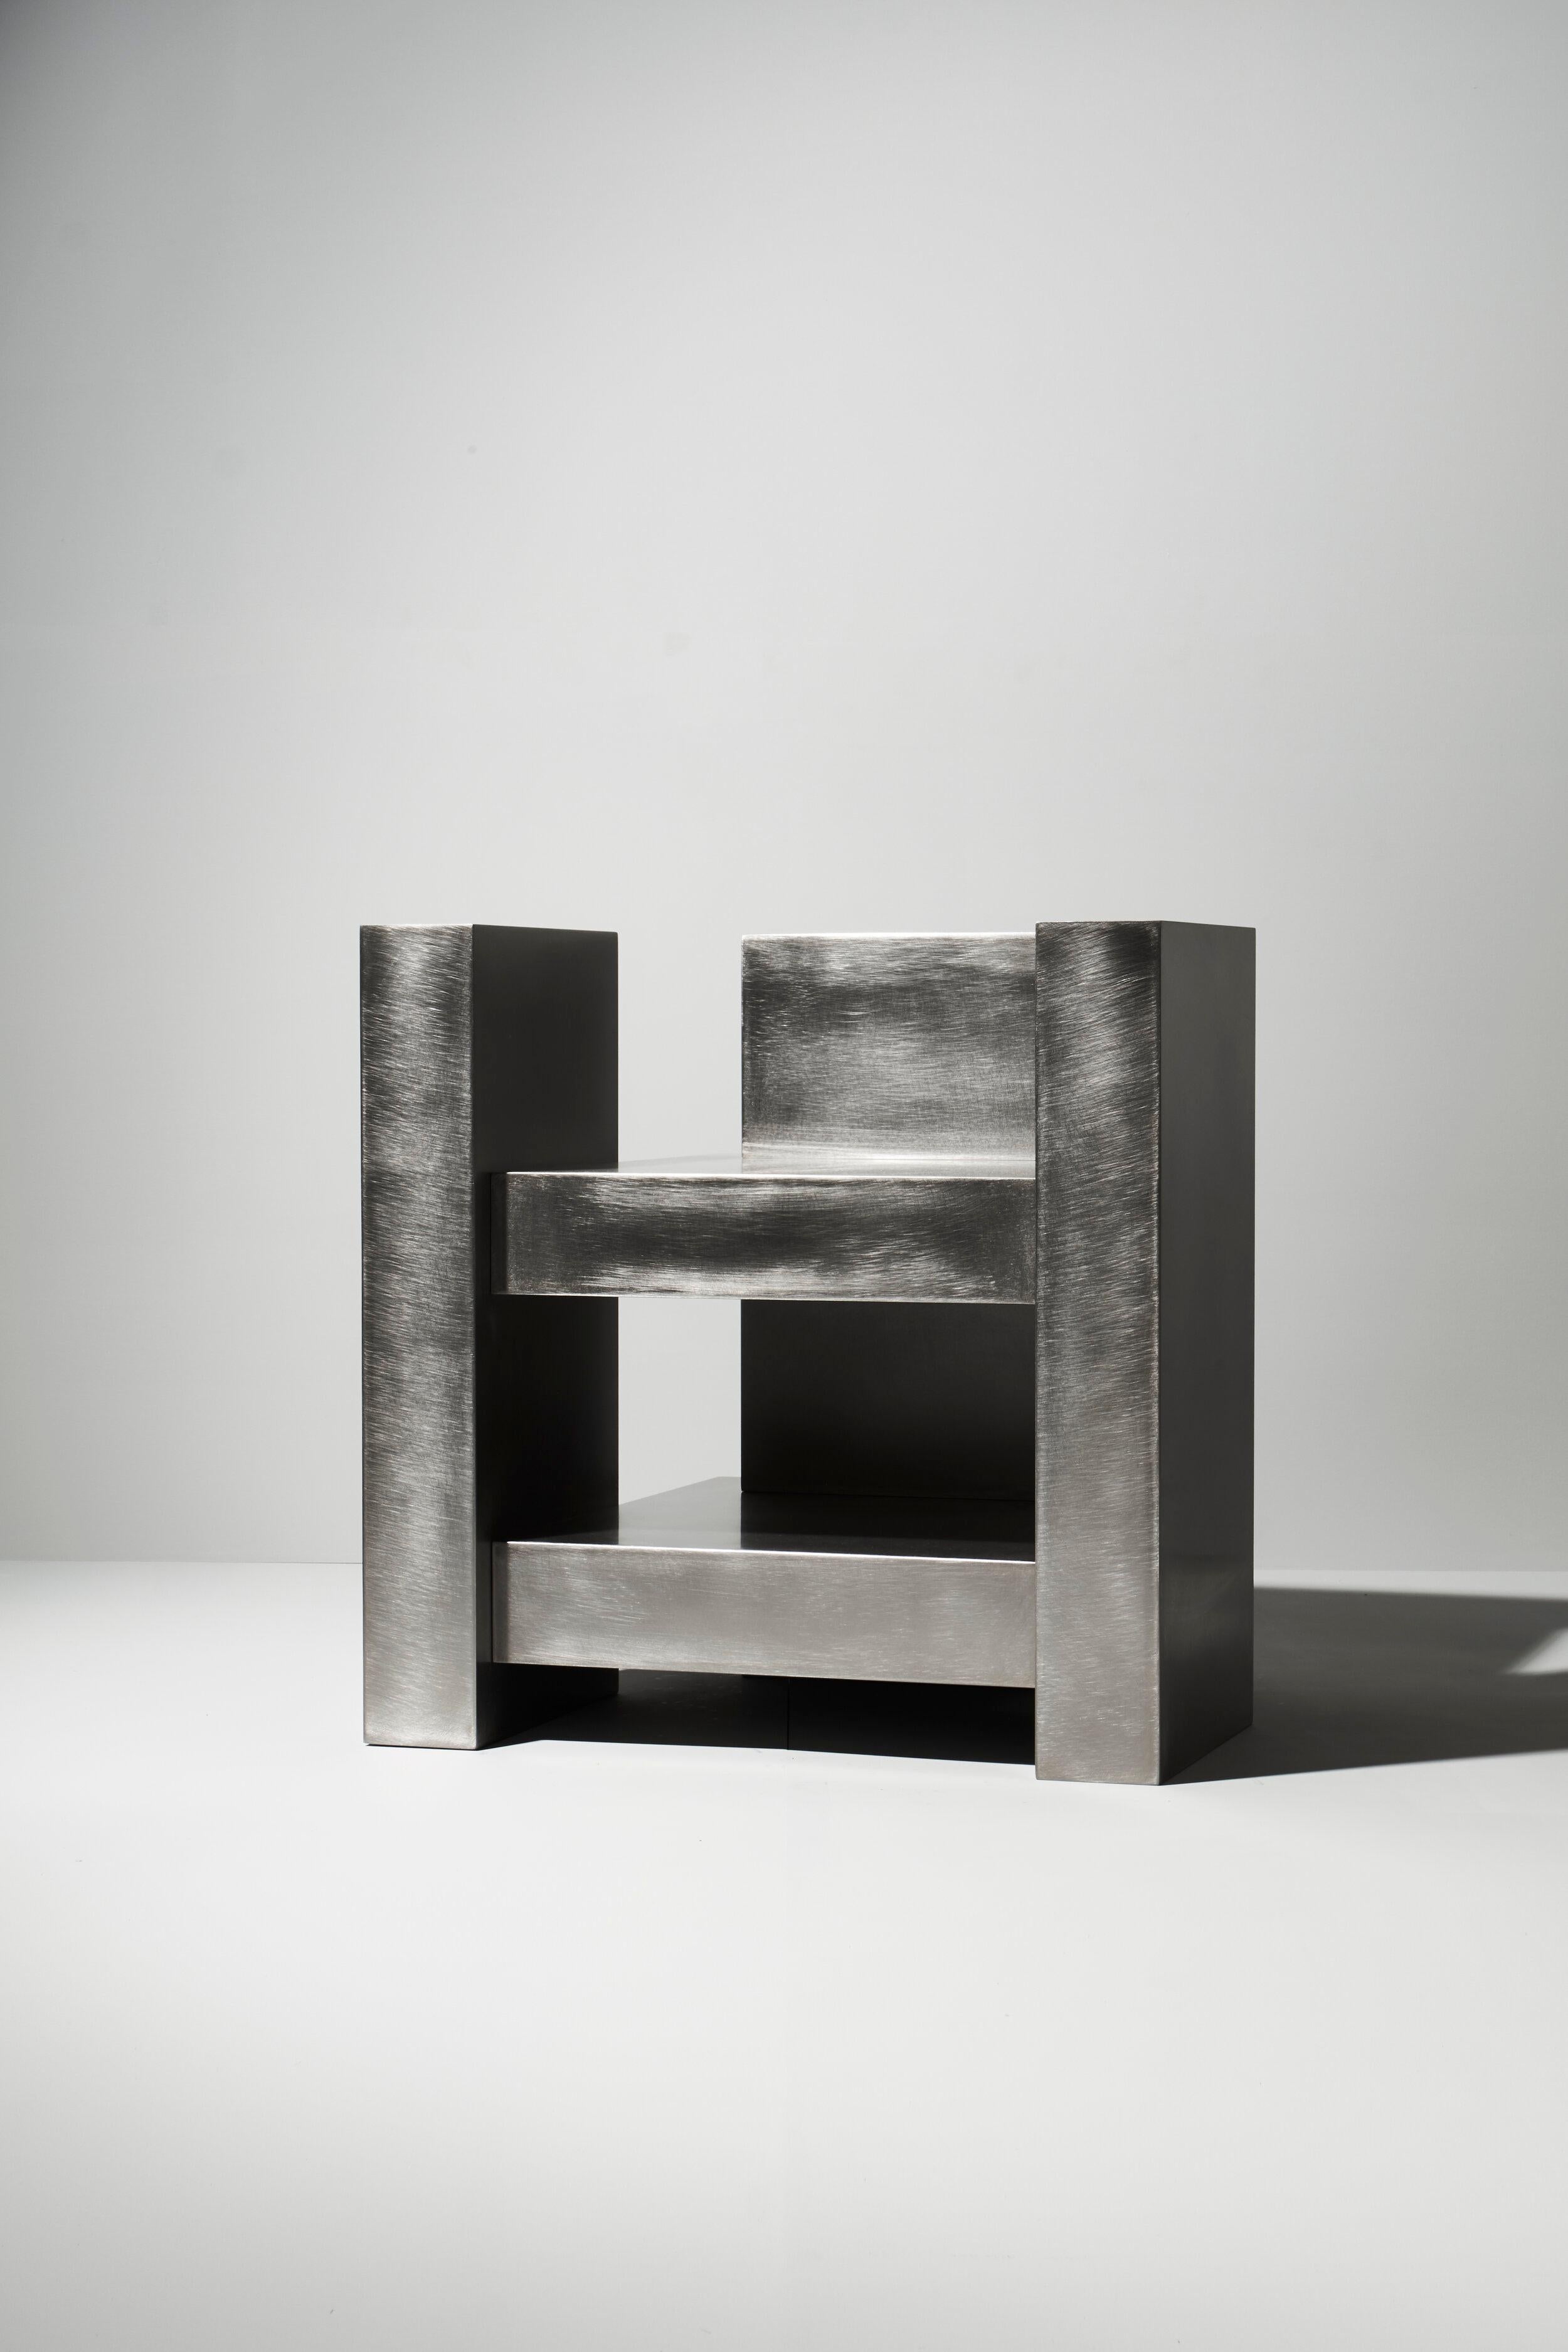 Layered steel seat by Hyungshin Hwang
Dimensions: D 60 x W 54 x H 60 cm
Materials: stainless steel

Layered Series is the main theme and concept of work of Hwang, who continues his experiment which is based on architectural composition of